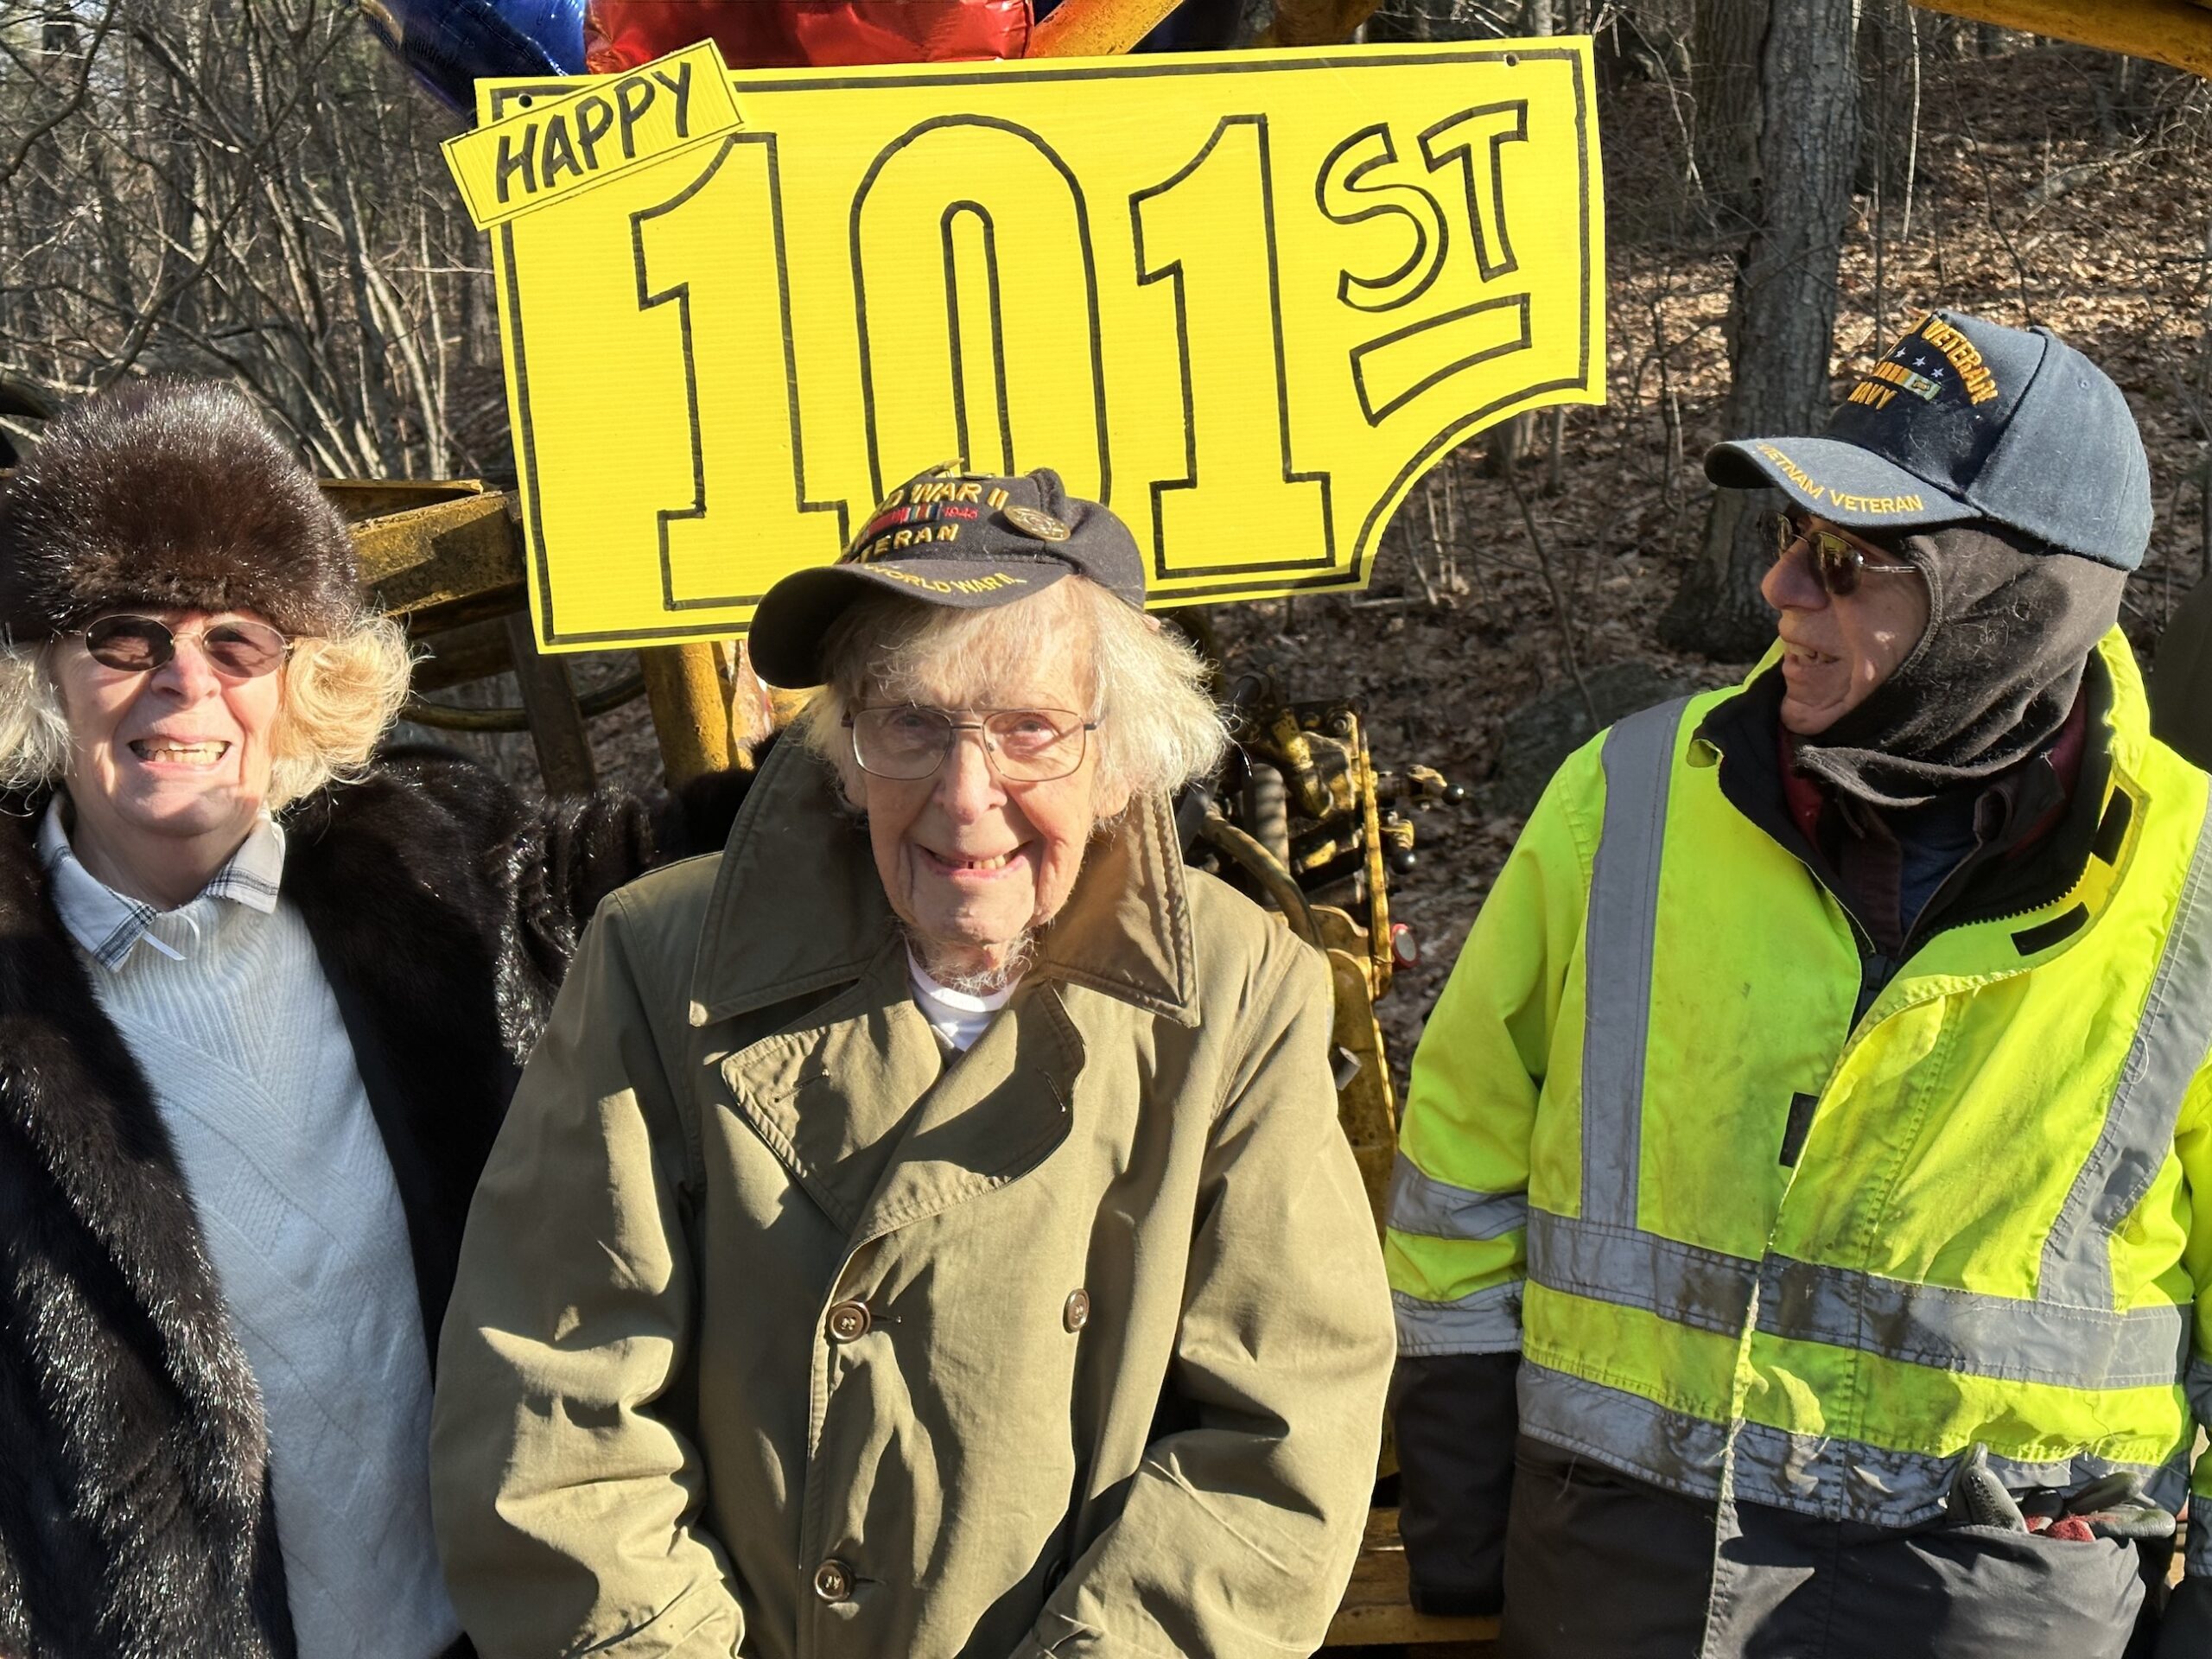 Photos: Russ Phipps celebrates 101st birthday with drive-by celebration